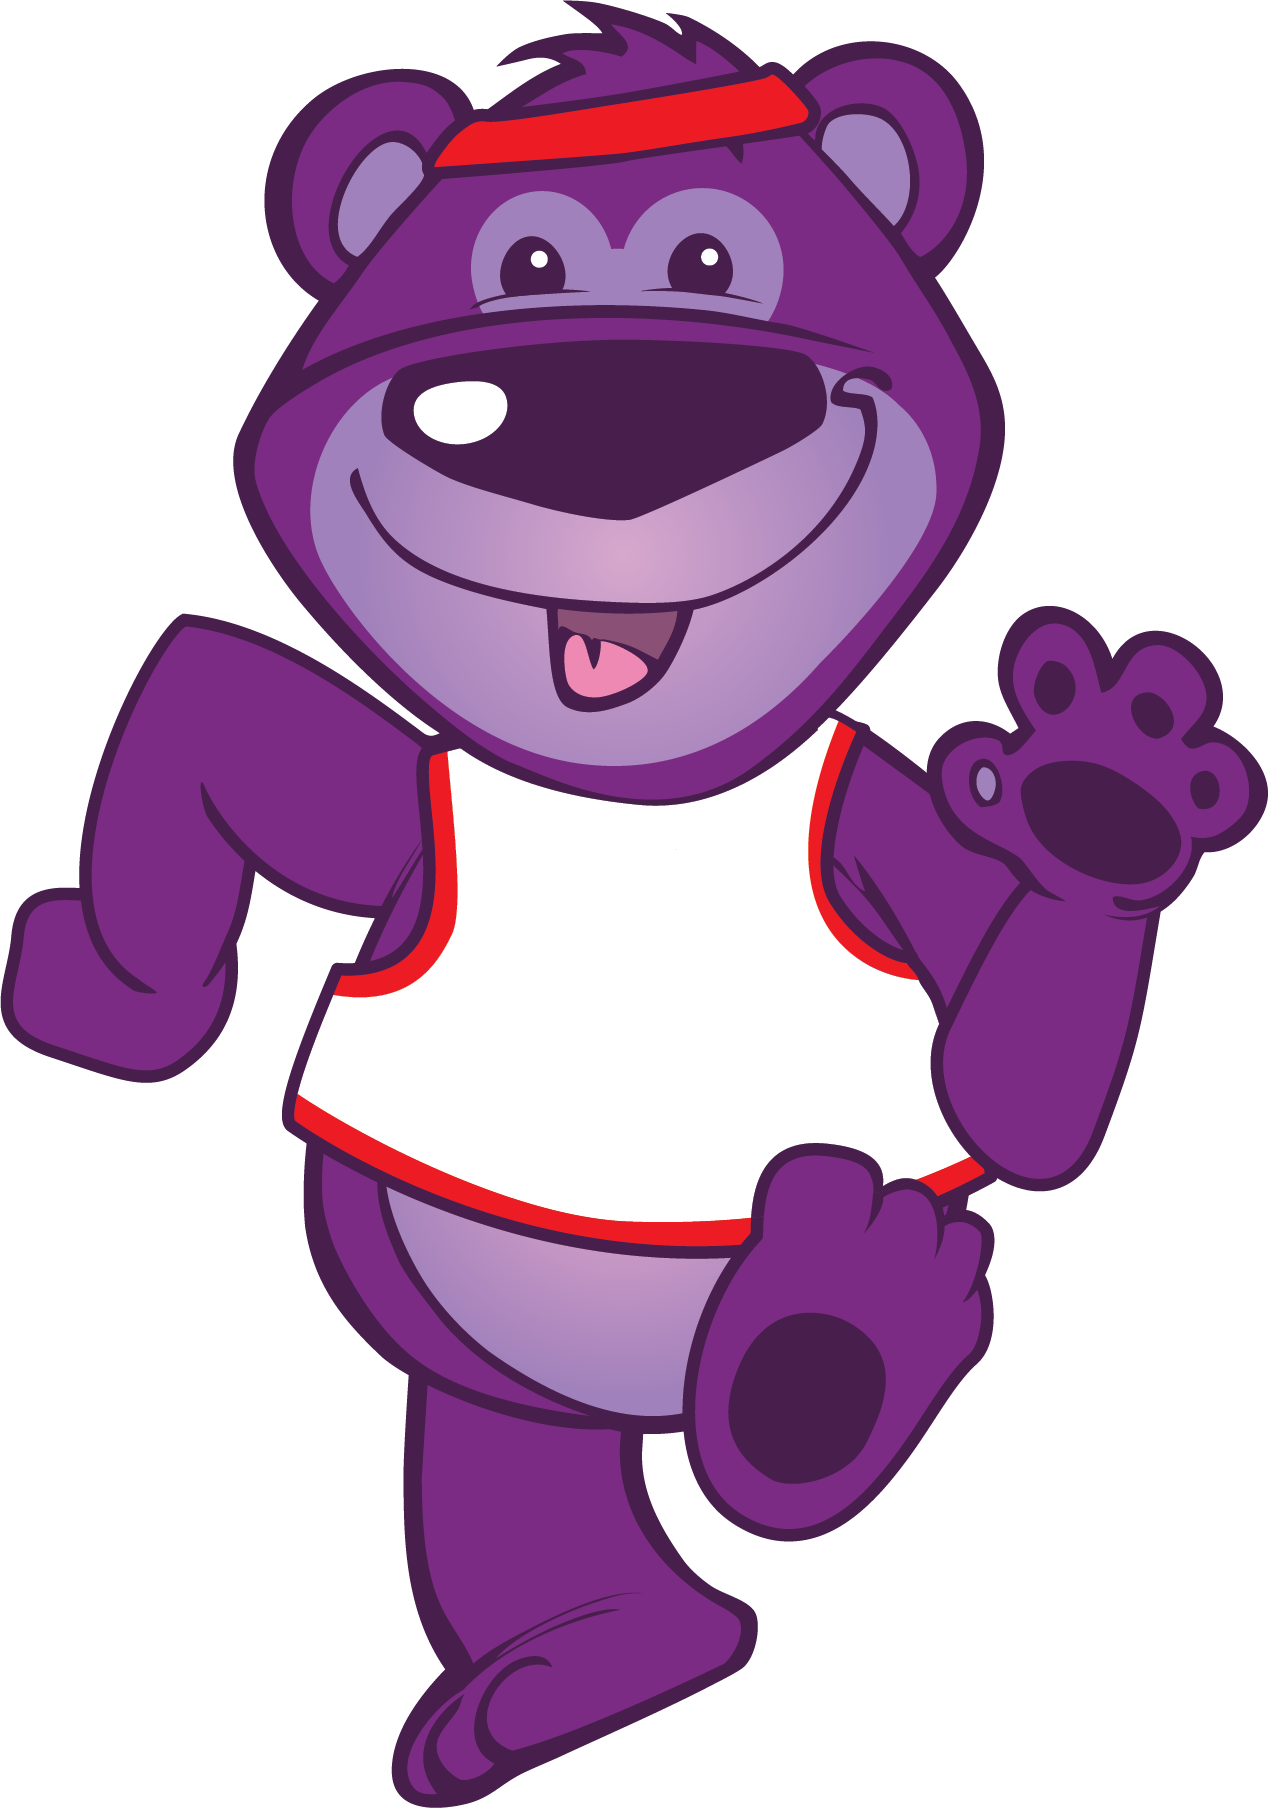 Get Active To Help Support Children Who Have Been Affected - Better Buddies Bear Transparent (1268x1808)